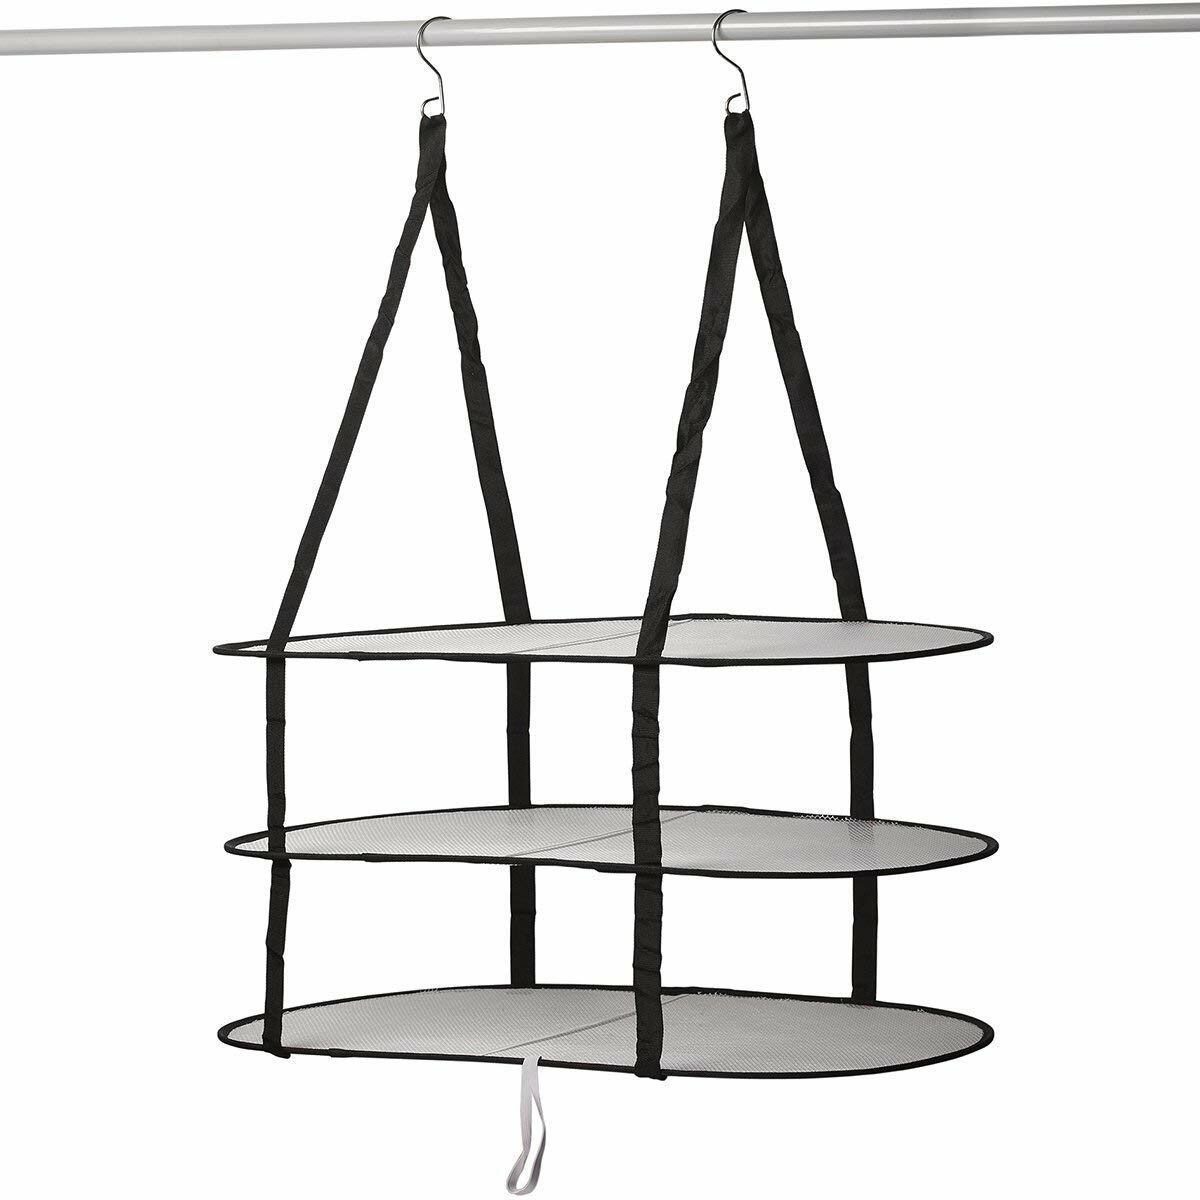 3-tier triangle freestanding mounted drying organizer